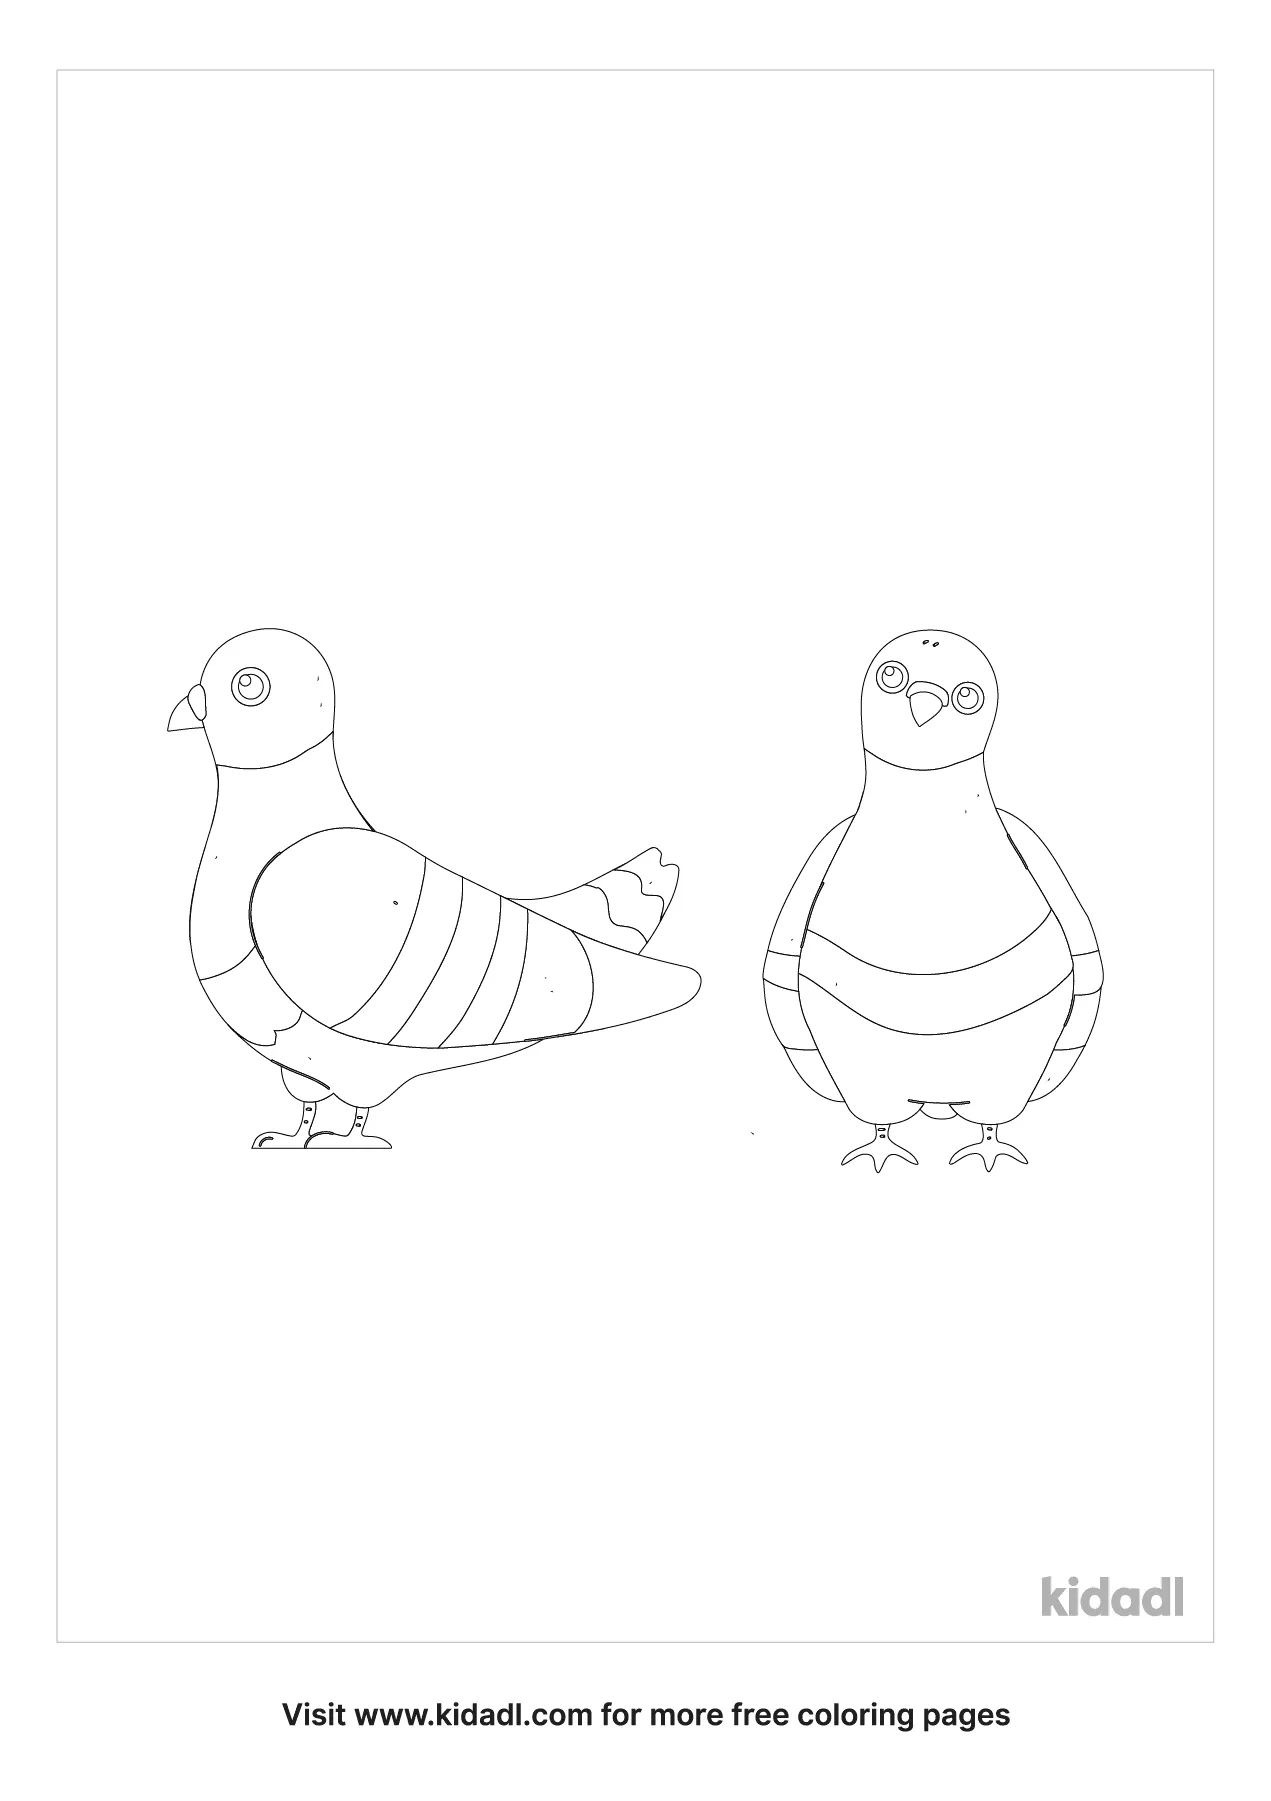 Two Sided Coloring Page